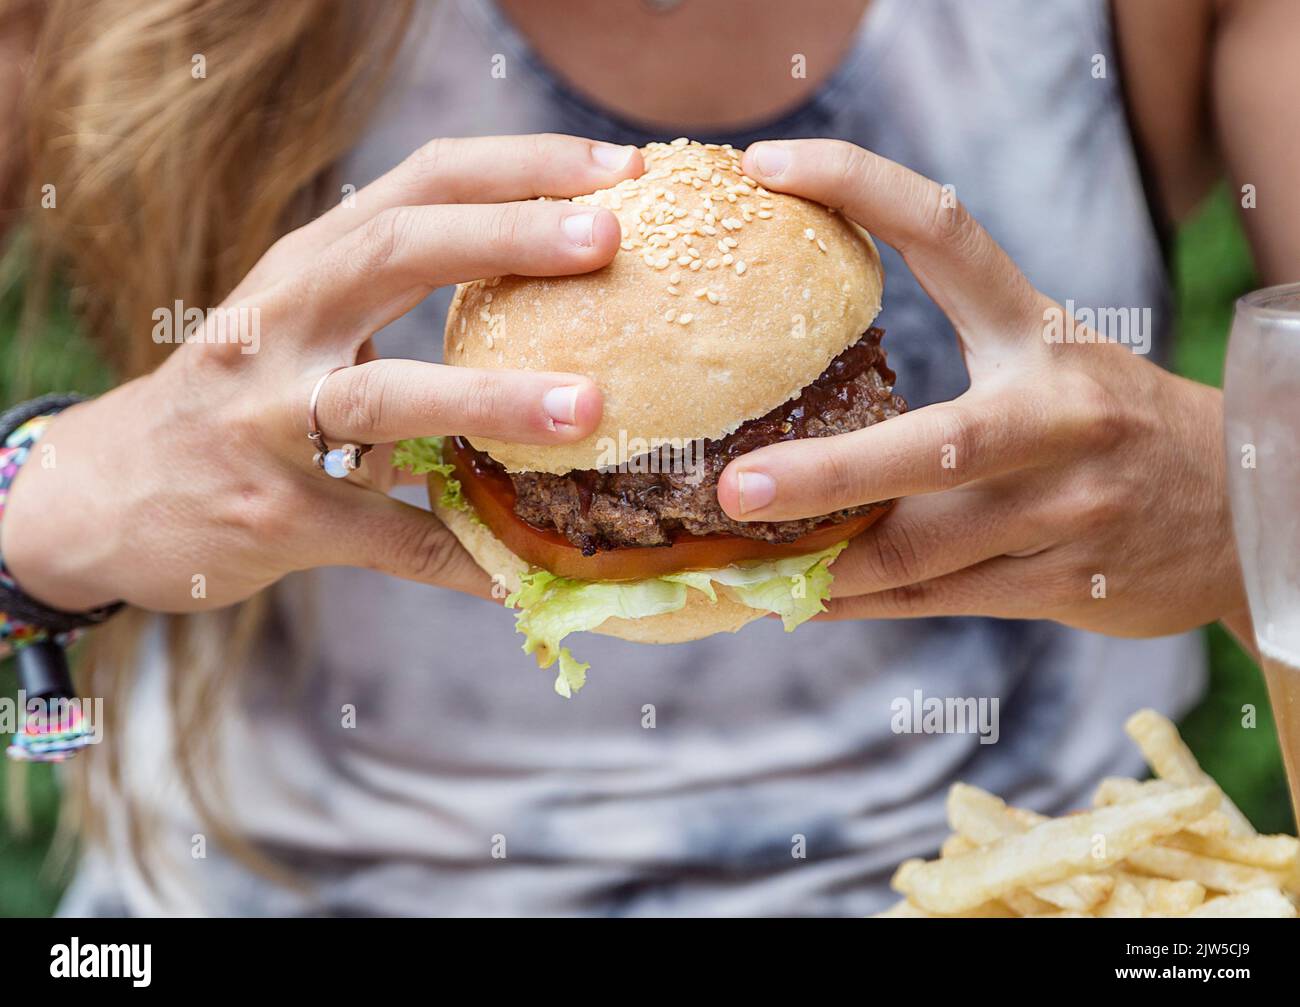 Hands holding a burger, on a restaurant table. Delicious and nutritious food. American style. Stock Photo